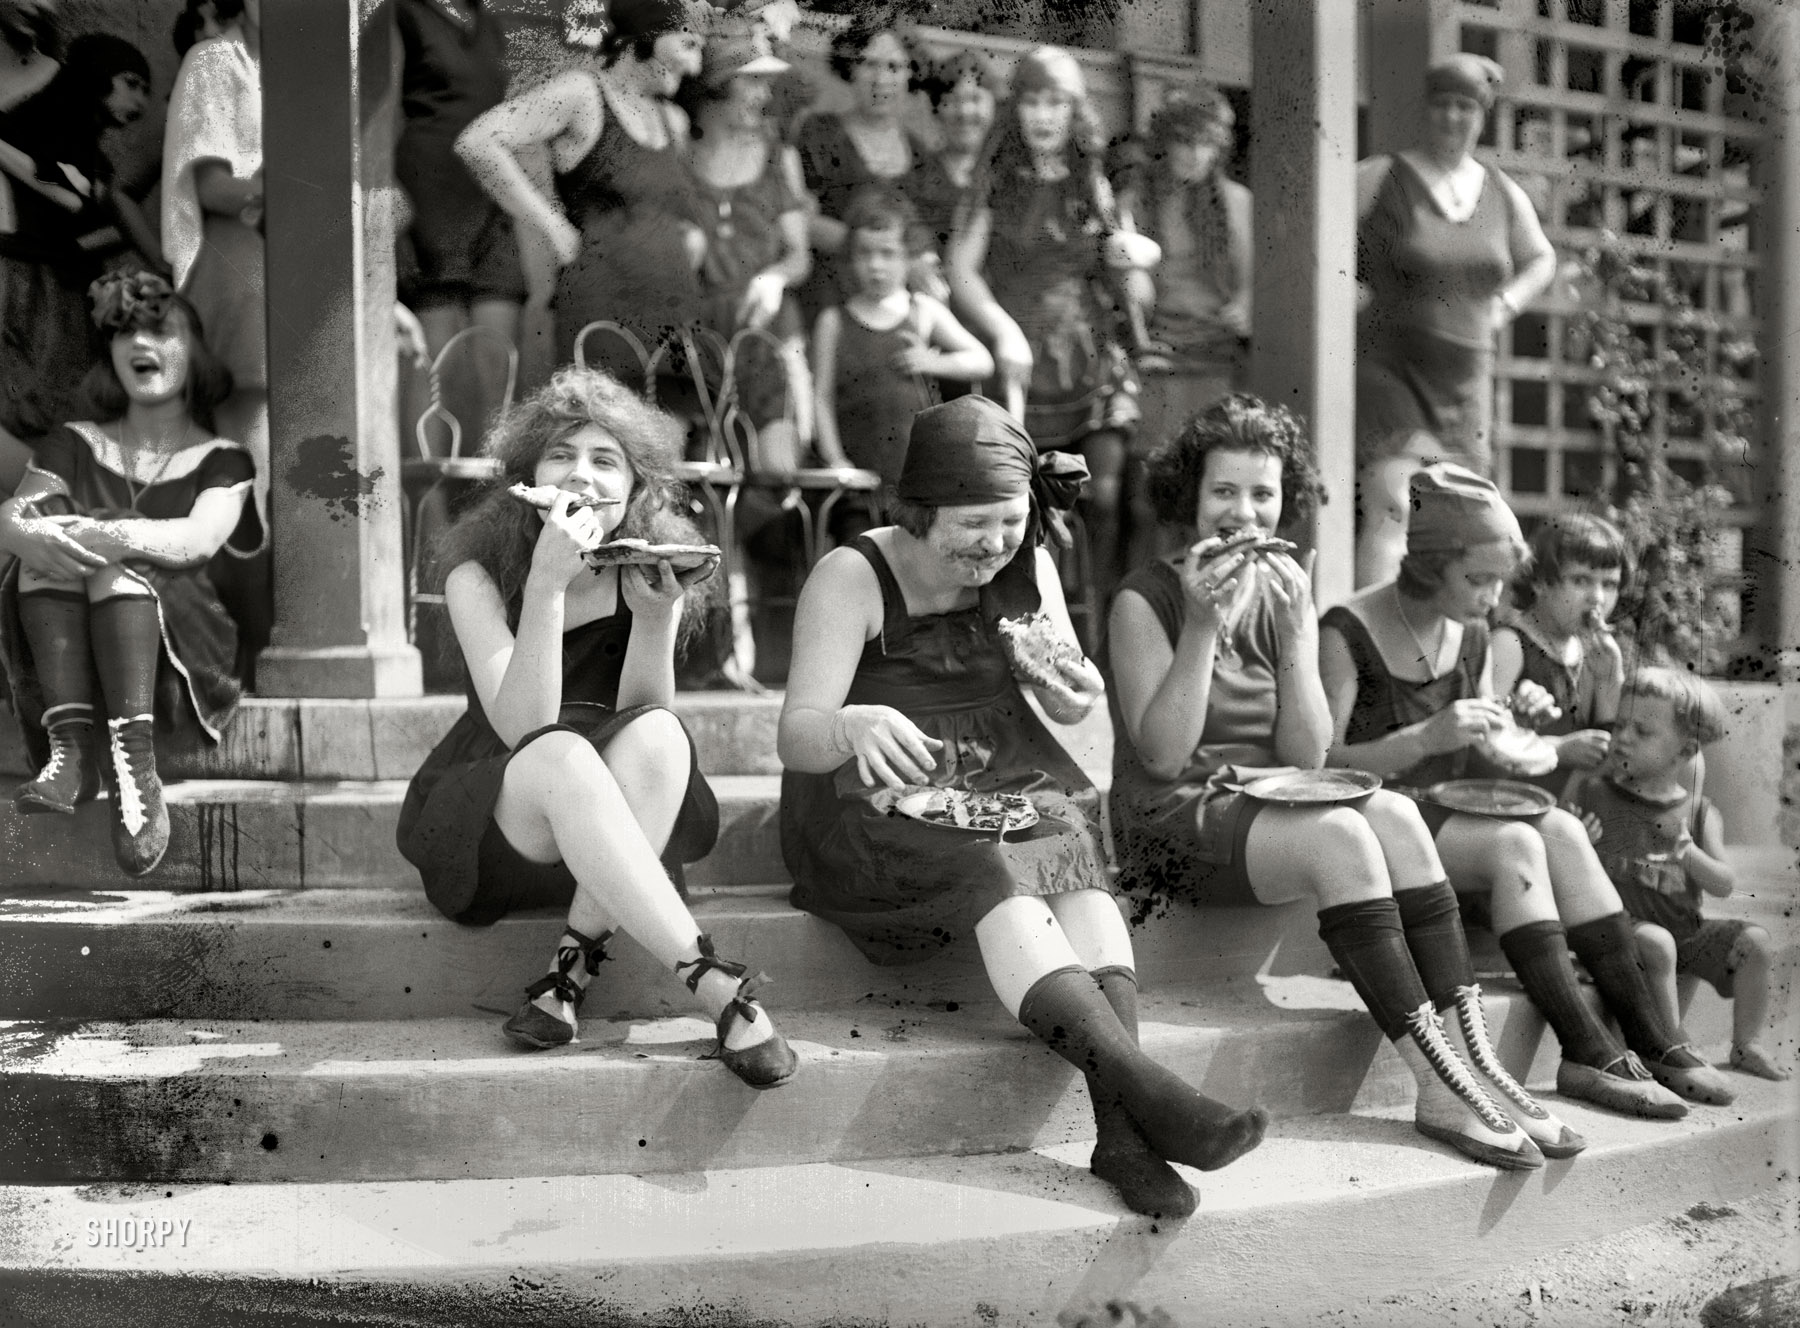 July 31, 1921. Washington, D.C. "Pie eating contest at Tidal Basin bathing beach." In the back row: the blurry but unmistakable facial contours of Iola Swinnerton. National Photo Company Collection glass negative. View full size.